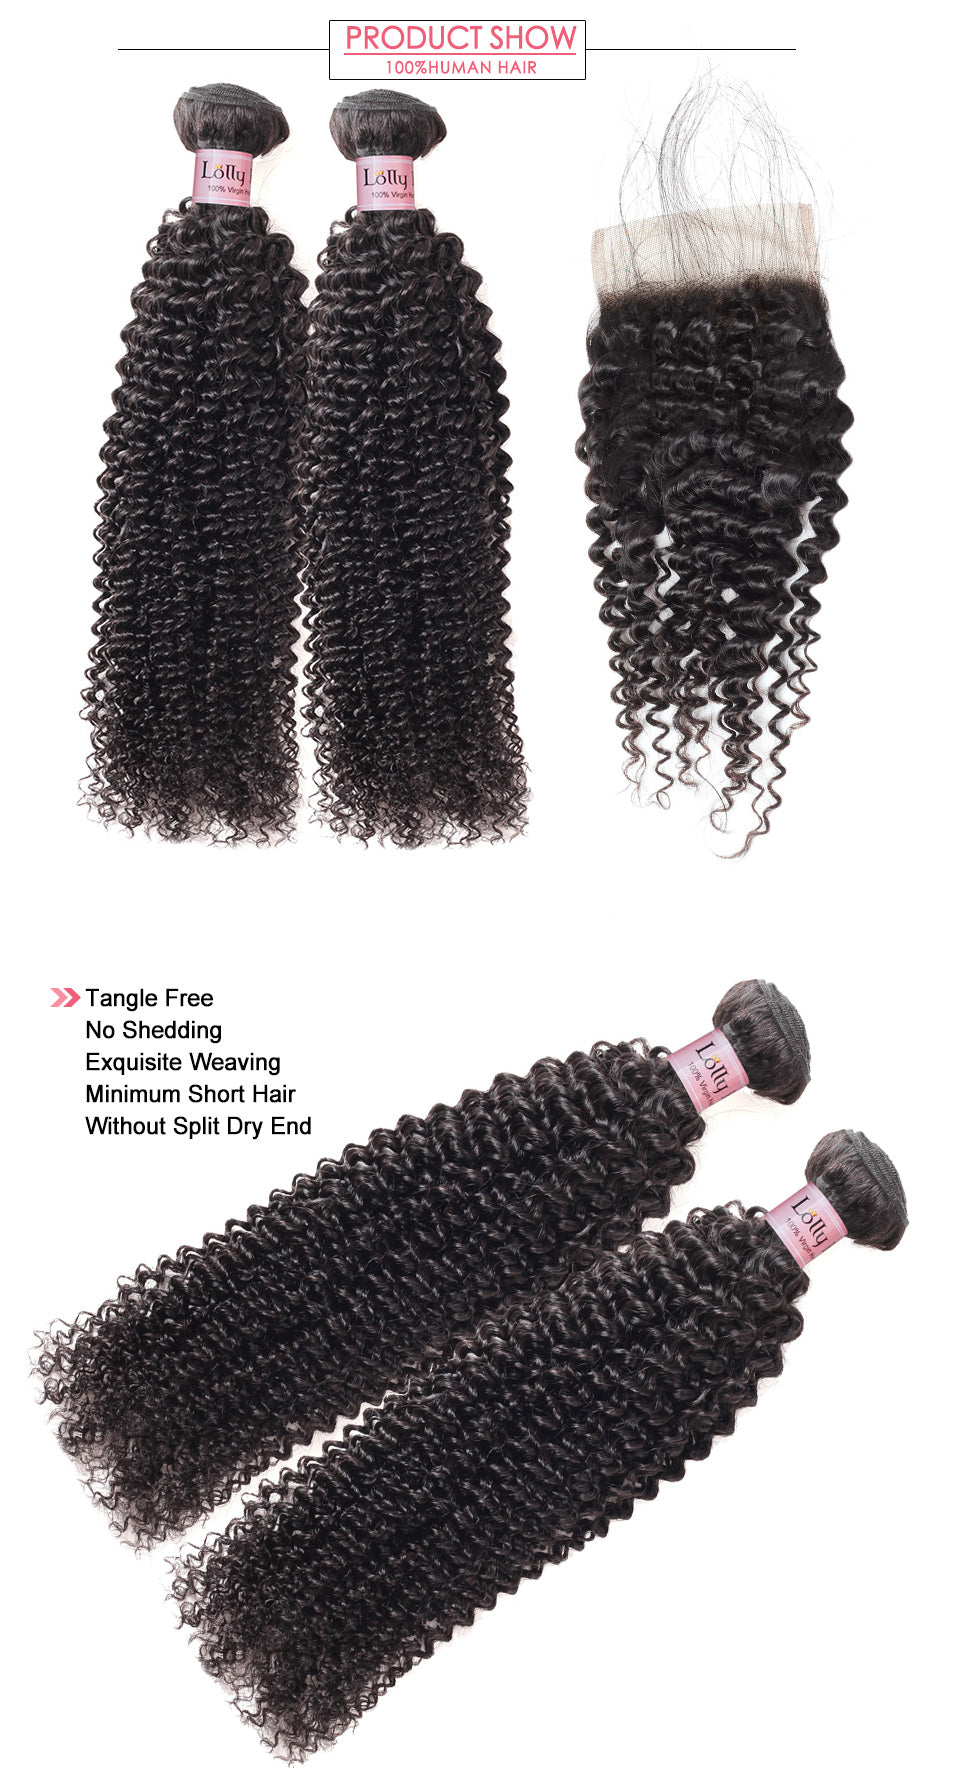 LOLLY 9A Virgin Malaysian Kinky Curly Hair 2 Bundles with Lace Closure